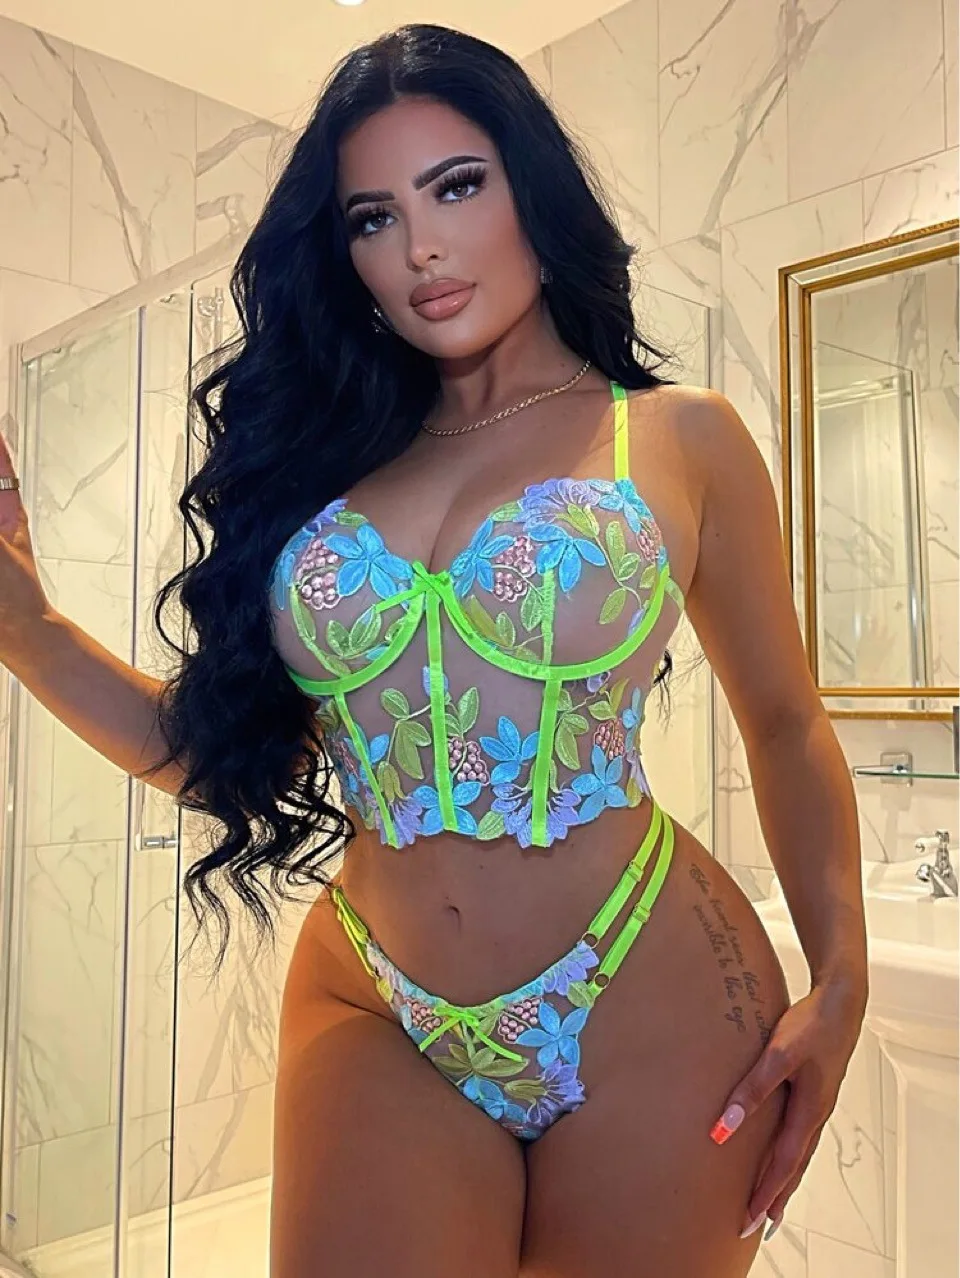 

Sexy Luxury Lingerie Floral Embroidery Set Woman 2 Pieces Underwire Bra Thongs Exotic Intimate Neon Green Underwear